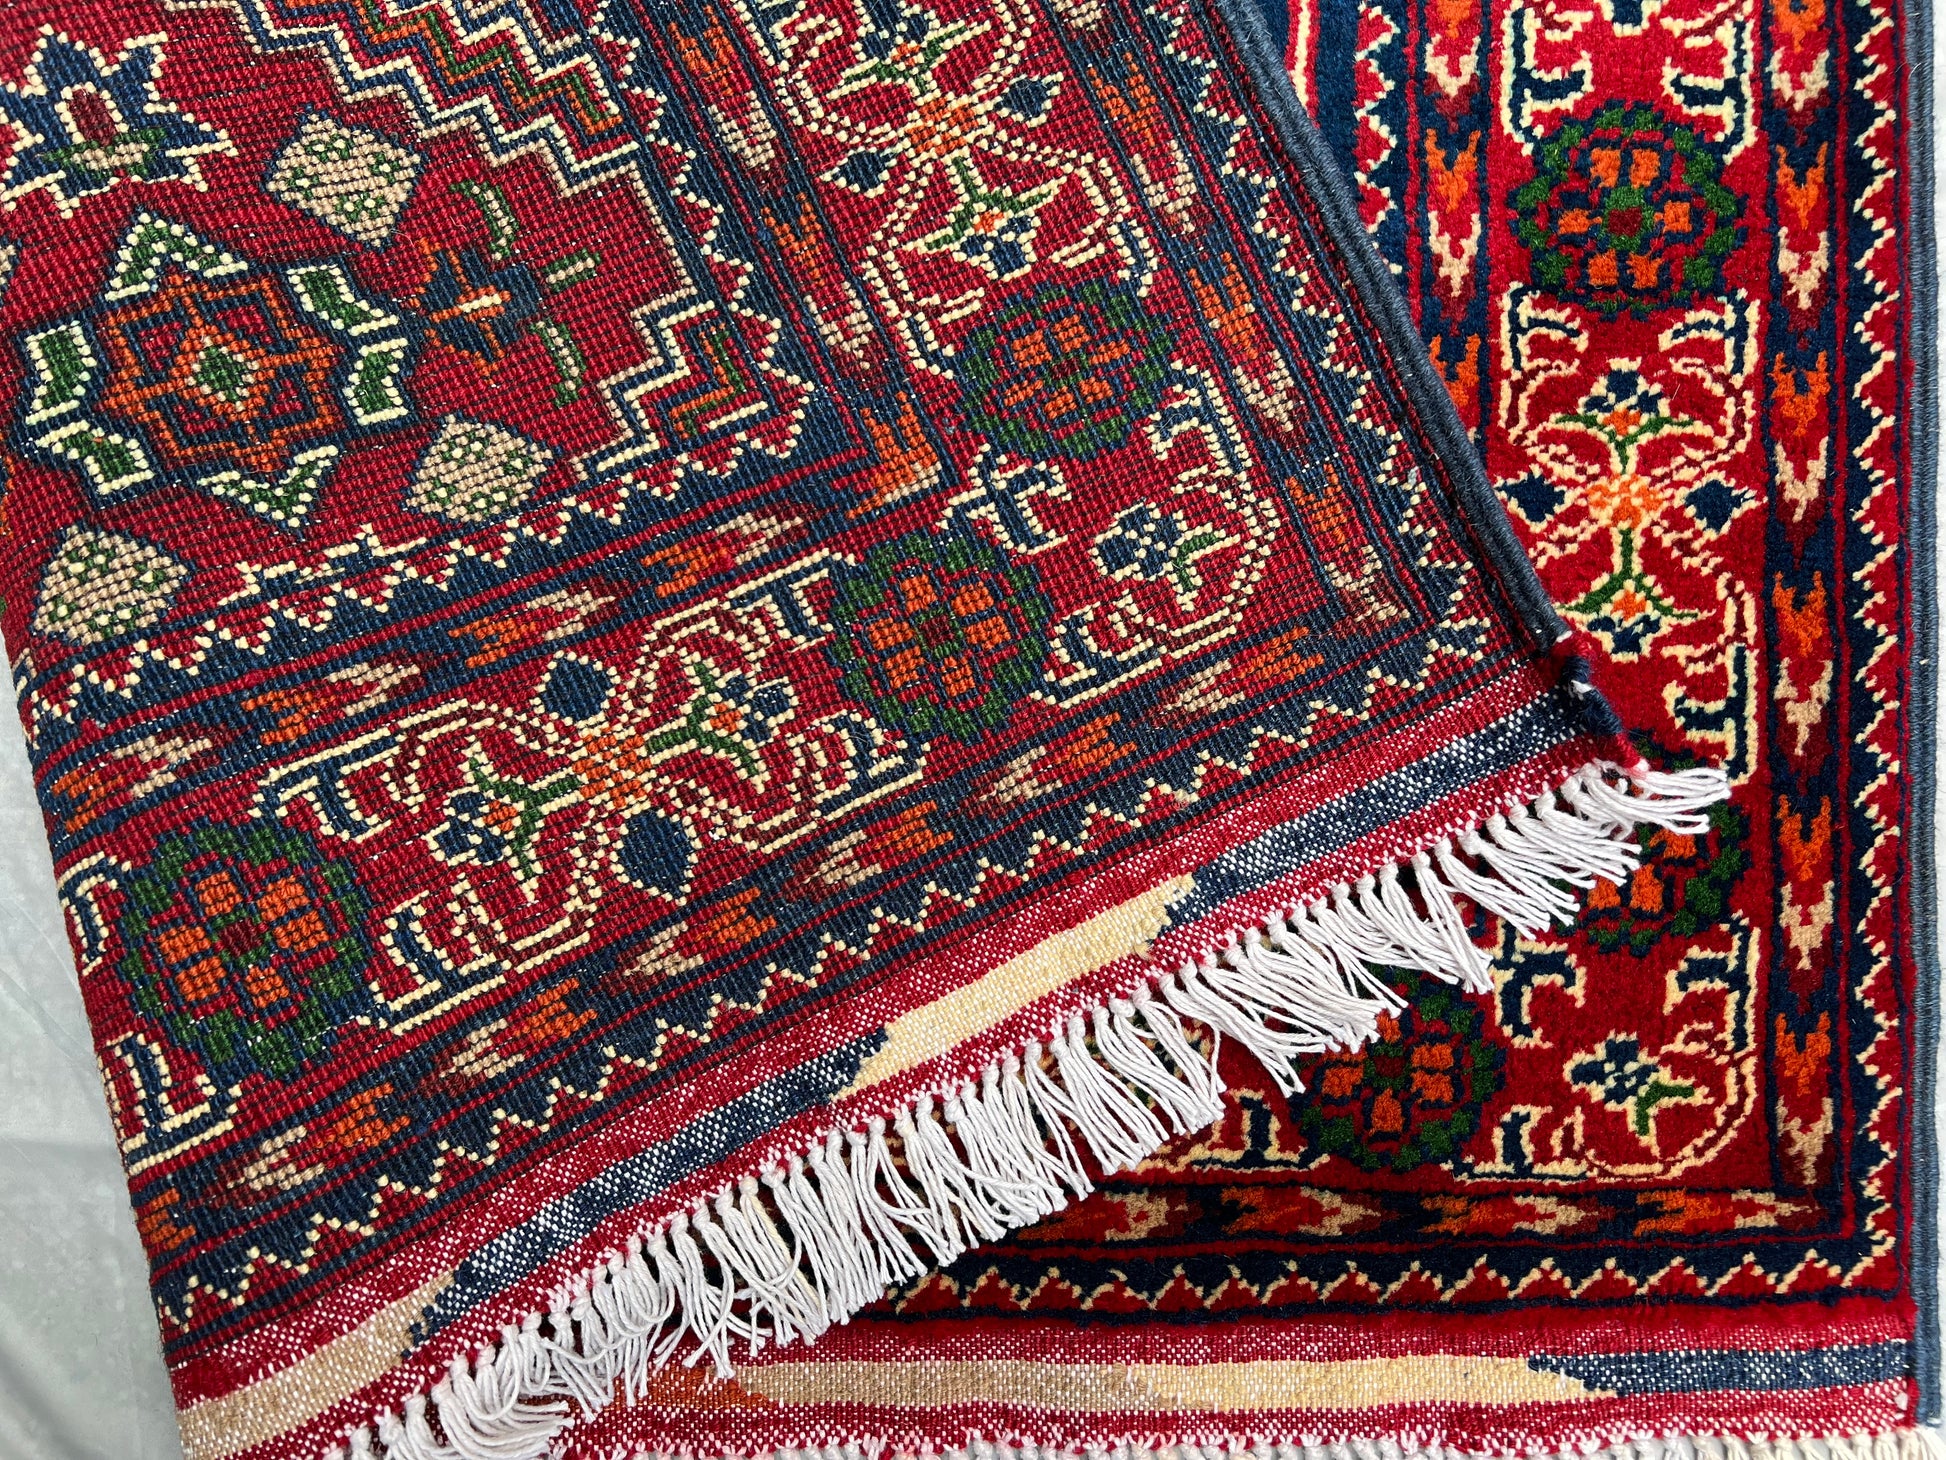 Hand Knitted/ Knotted Hallway Runner Yousuf Bayi Merino 7ftx3.1ft (YB-RU-7X3-DB/R/Y-N) (Mazar-e-Sharif) - Kabul Rugs